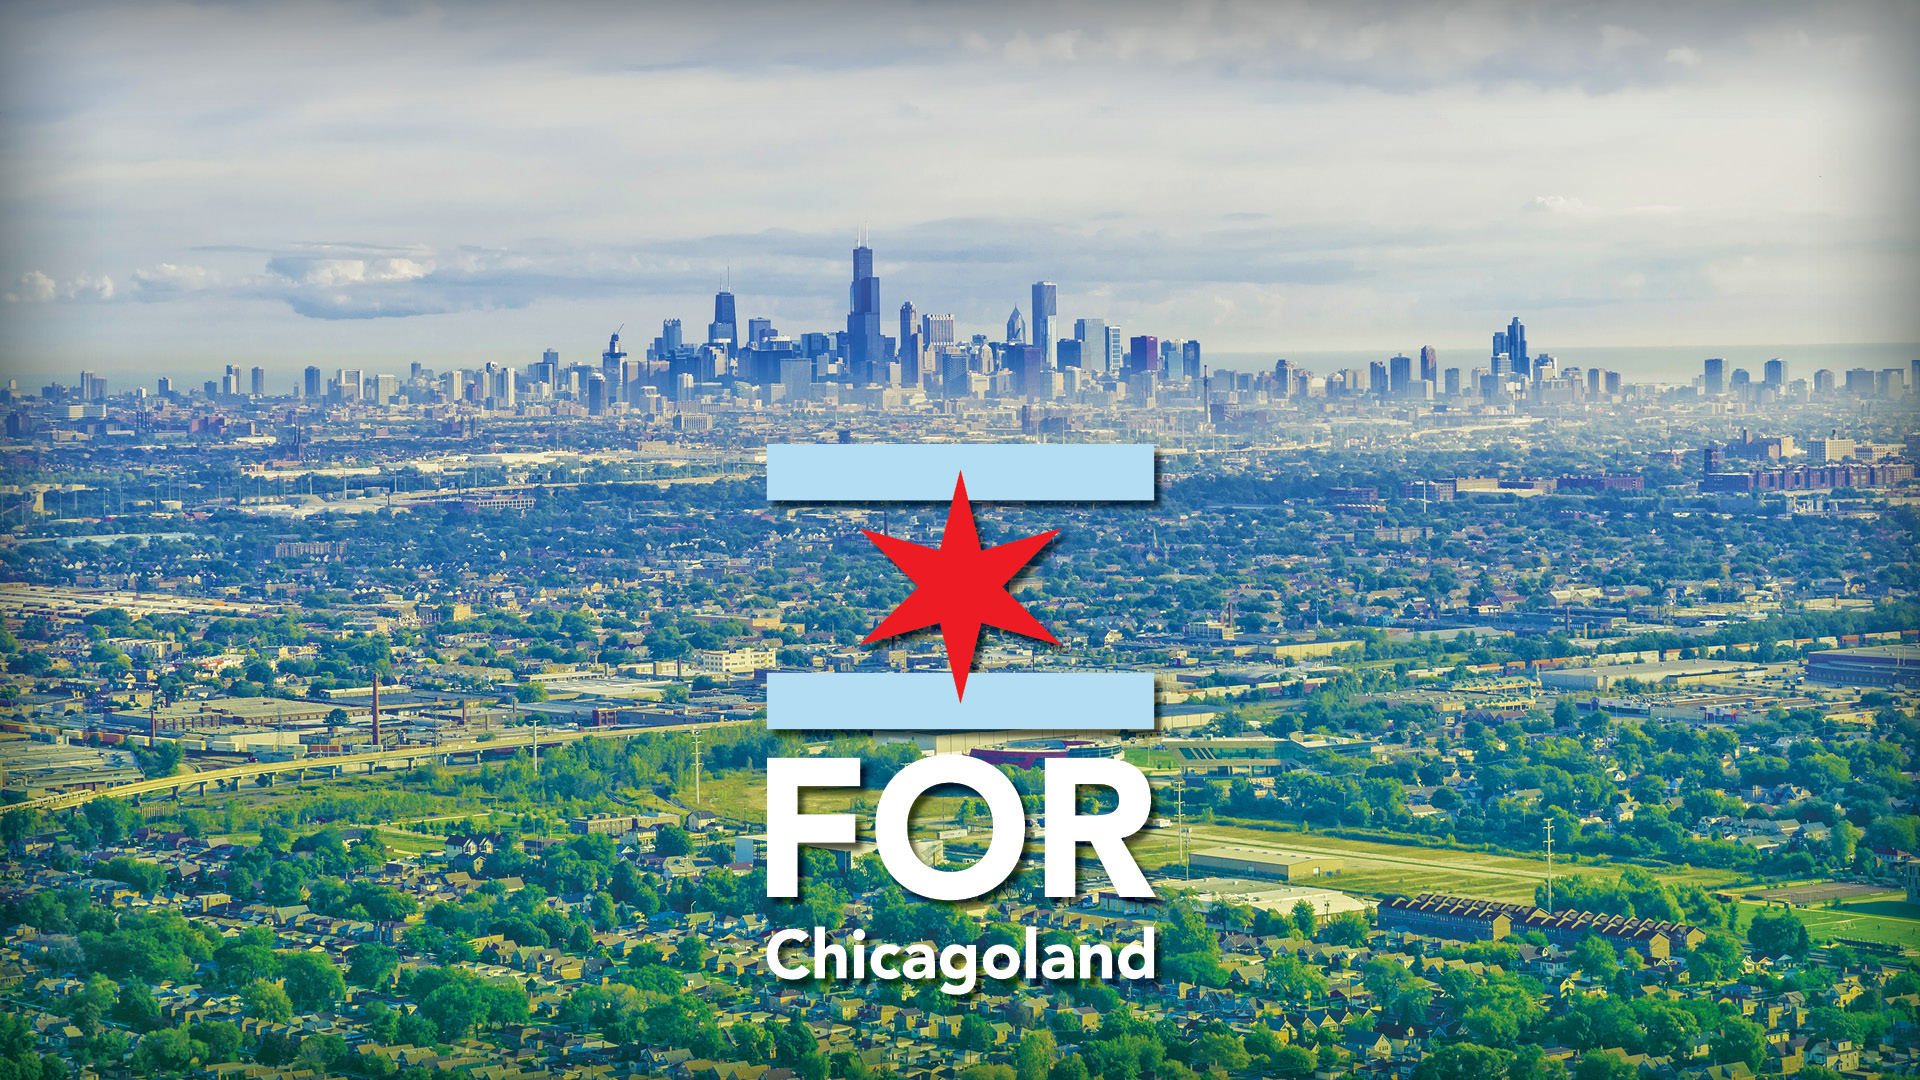 For Chicagoland | First Saturday Serve
Saturday, October 7
 
